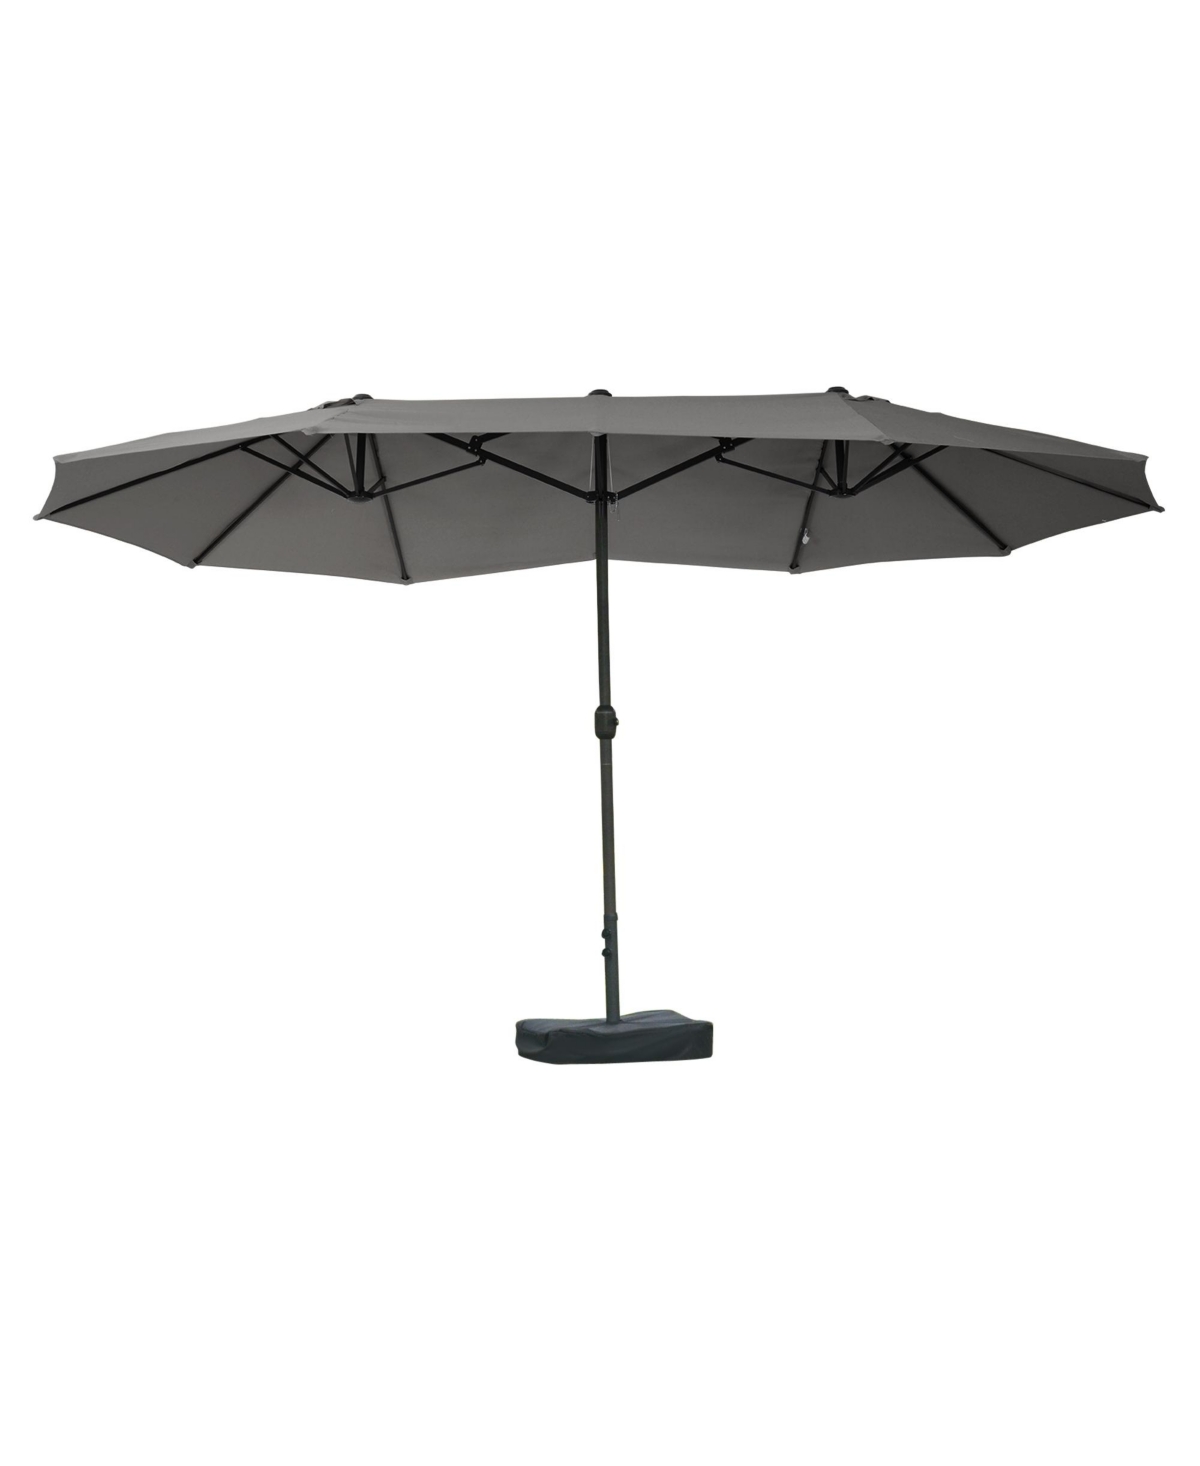 Patio Umbrella 15' Steel Rectangular Outdoor Double Sided Market with base, Uv Sun Protection & Easy Crank for Deck Pool Patio, Dark Gray - D